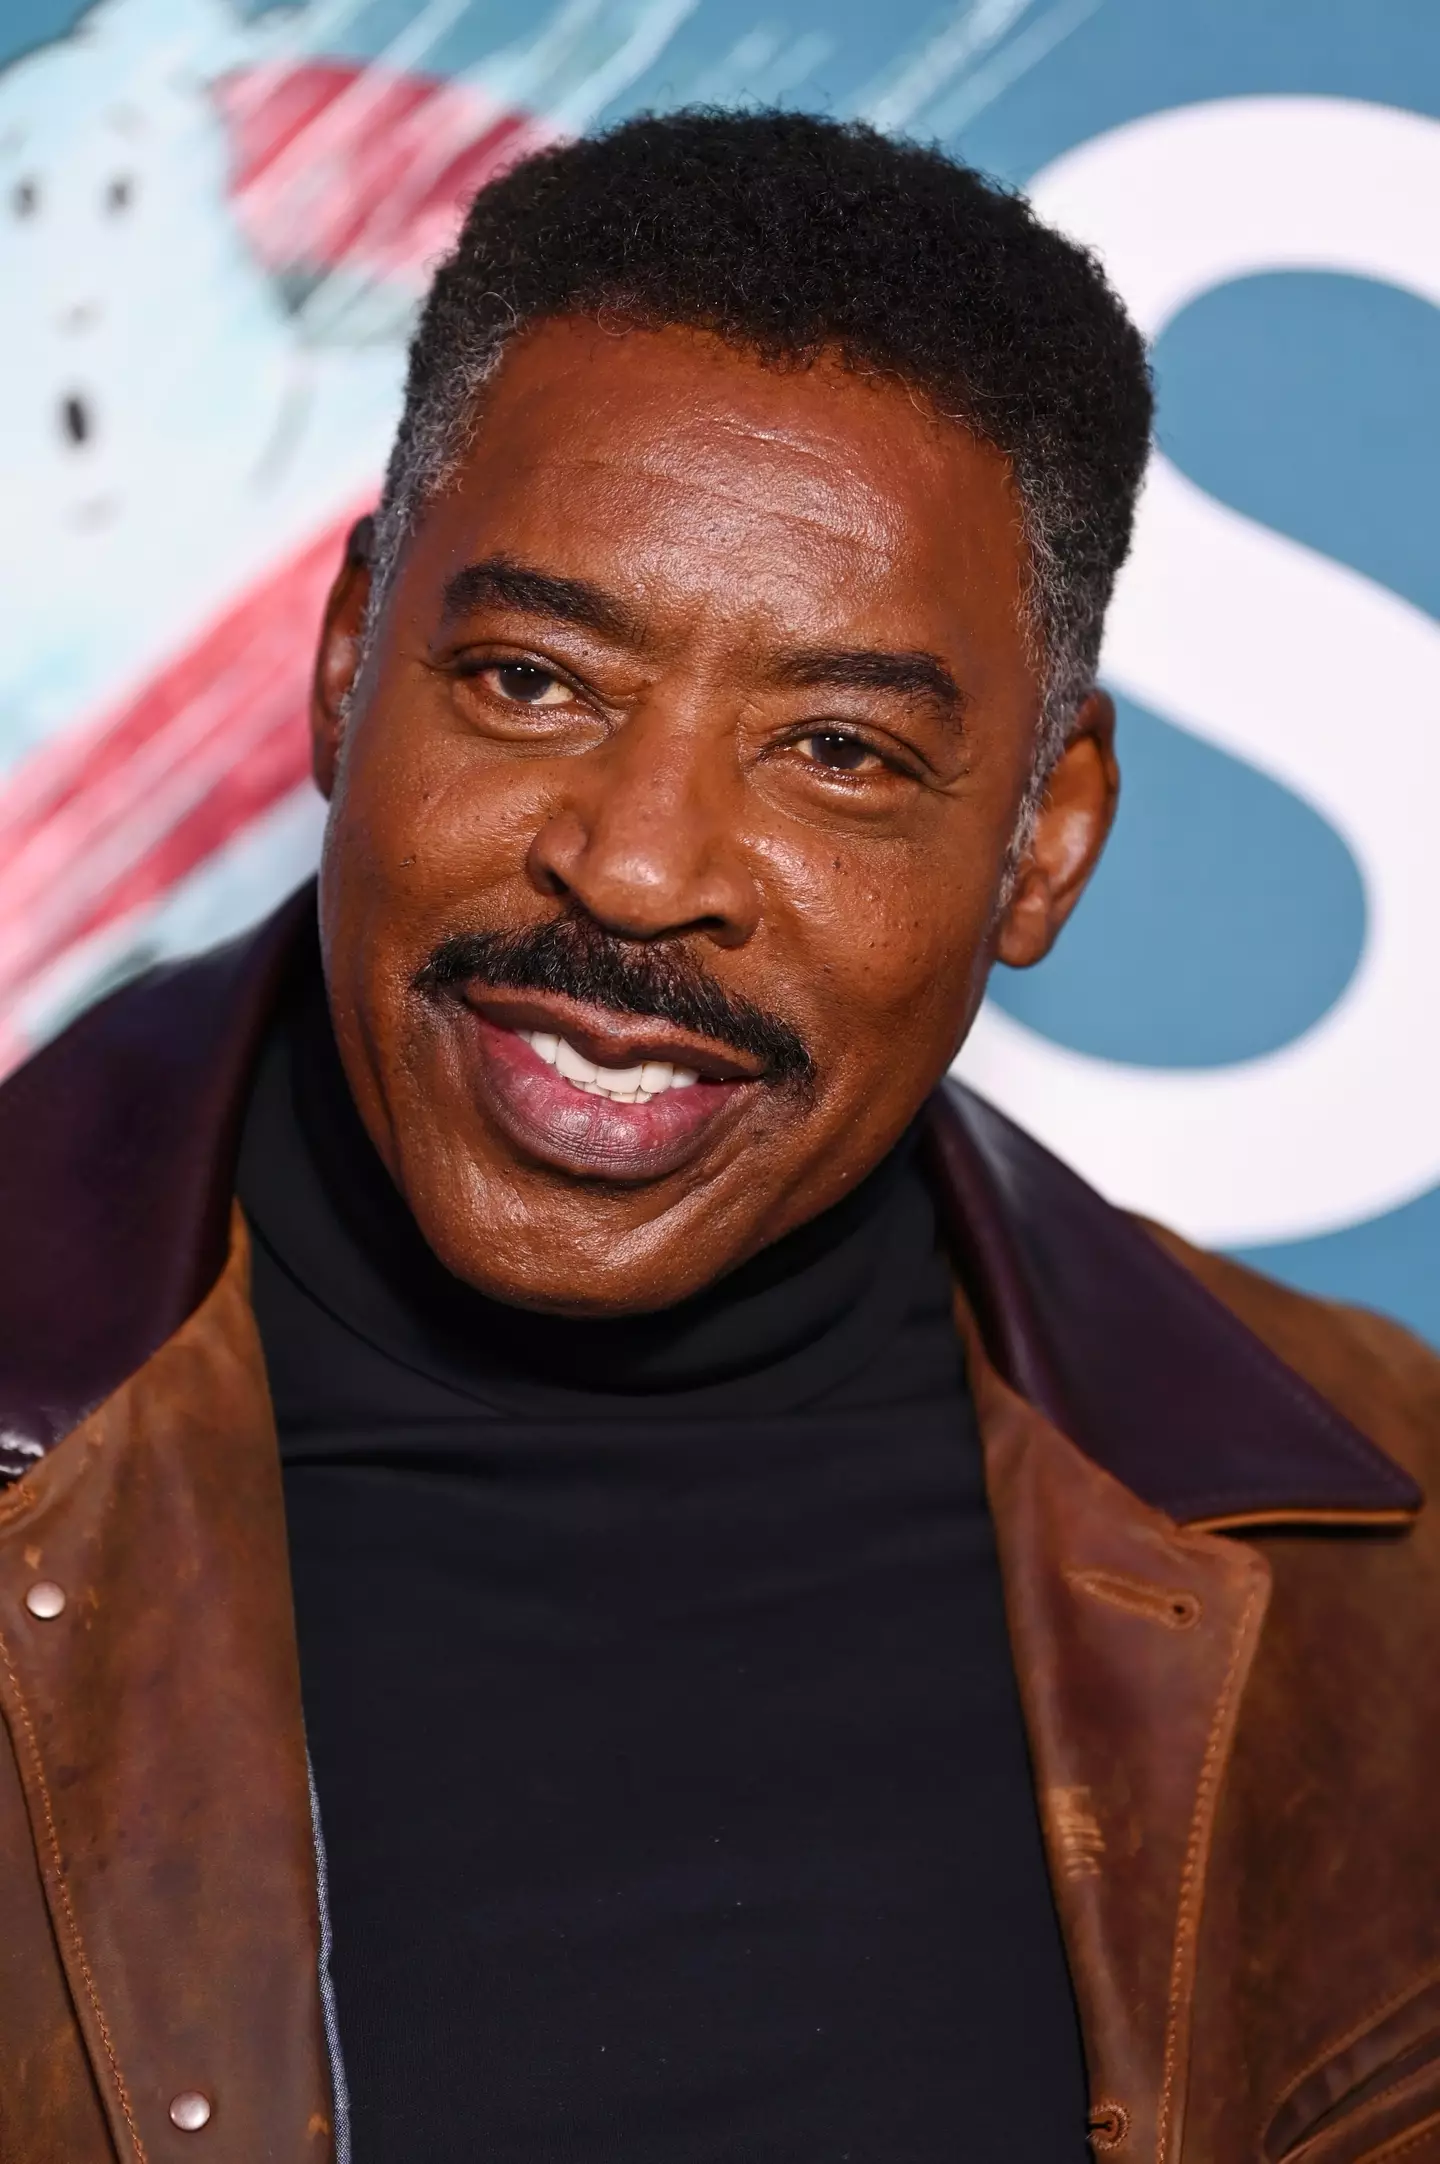 Ernie Hudson is back with Ghostbusters.